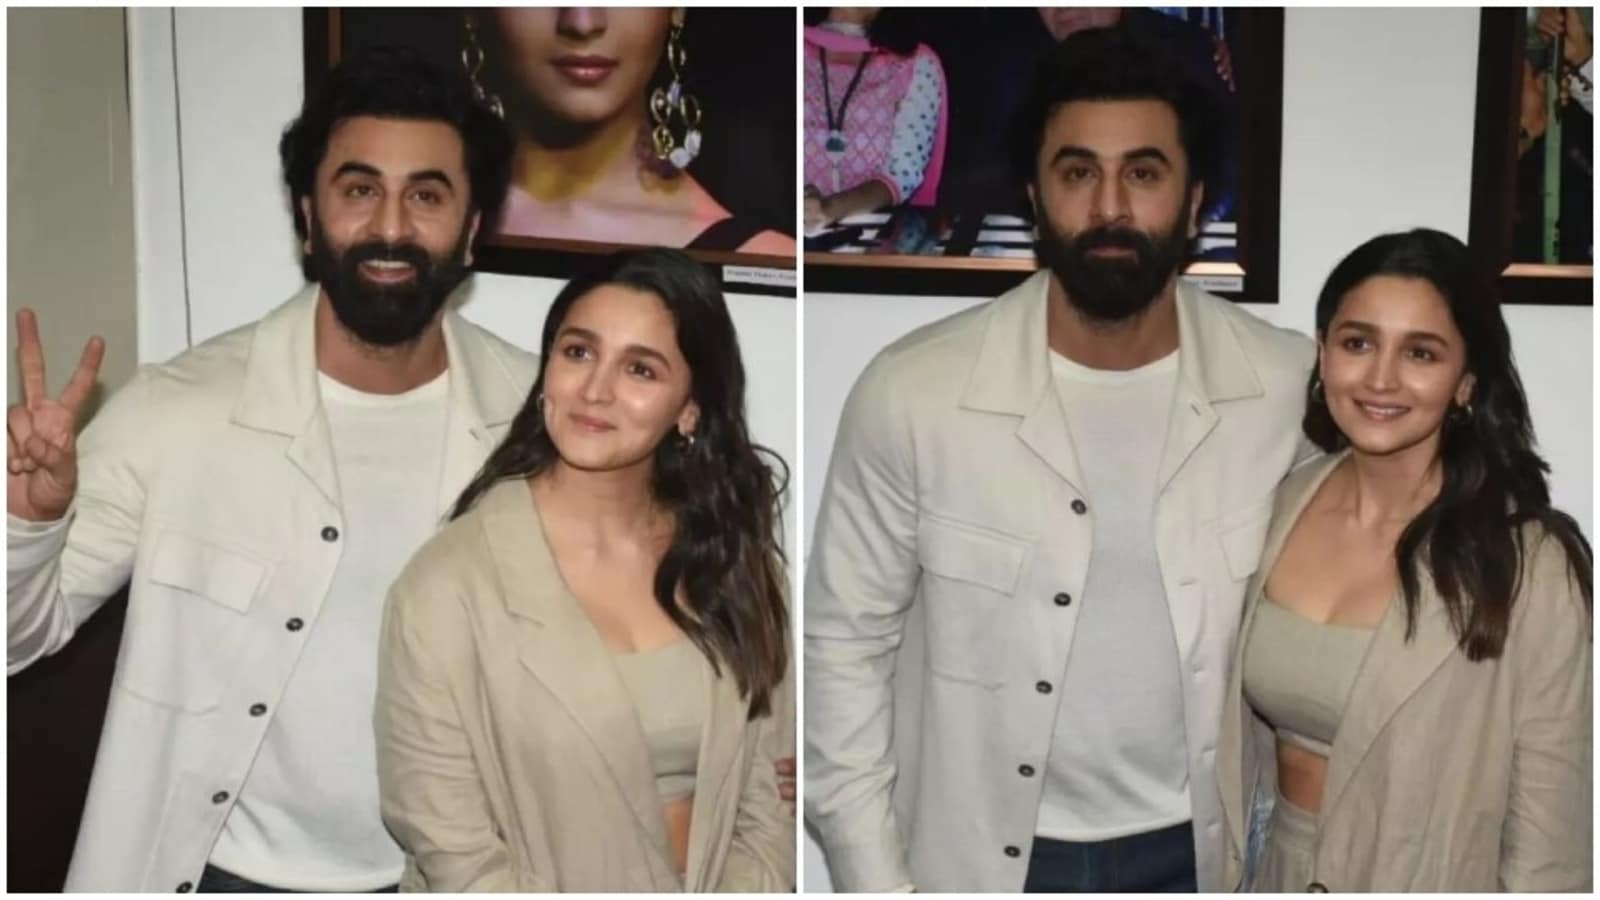 Alia Bhatt makes effortless styling look easy in chic powersuit with Ranbir Kapoor at Mumbai event: All pics, videos